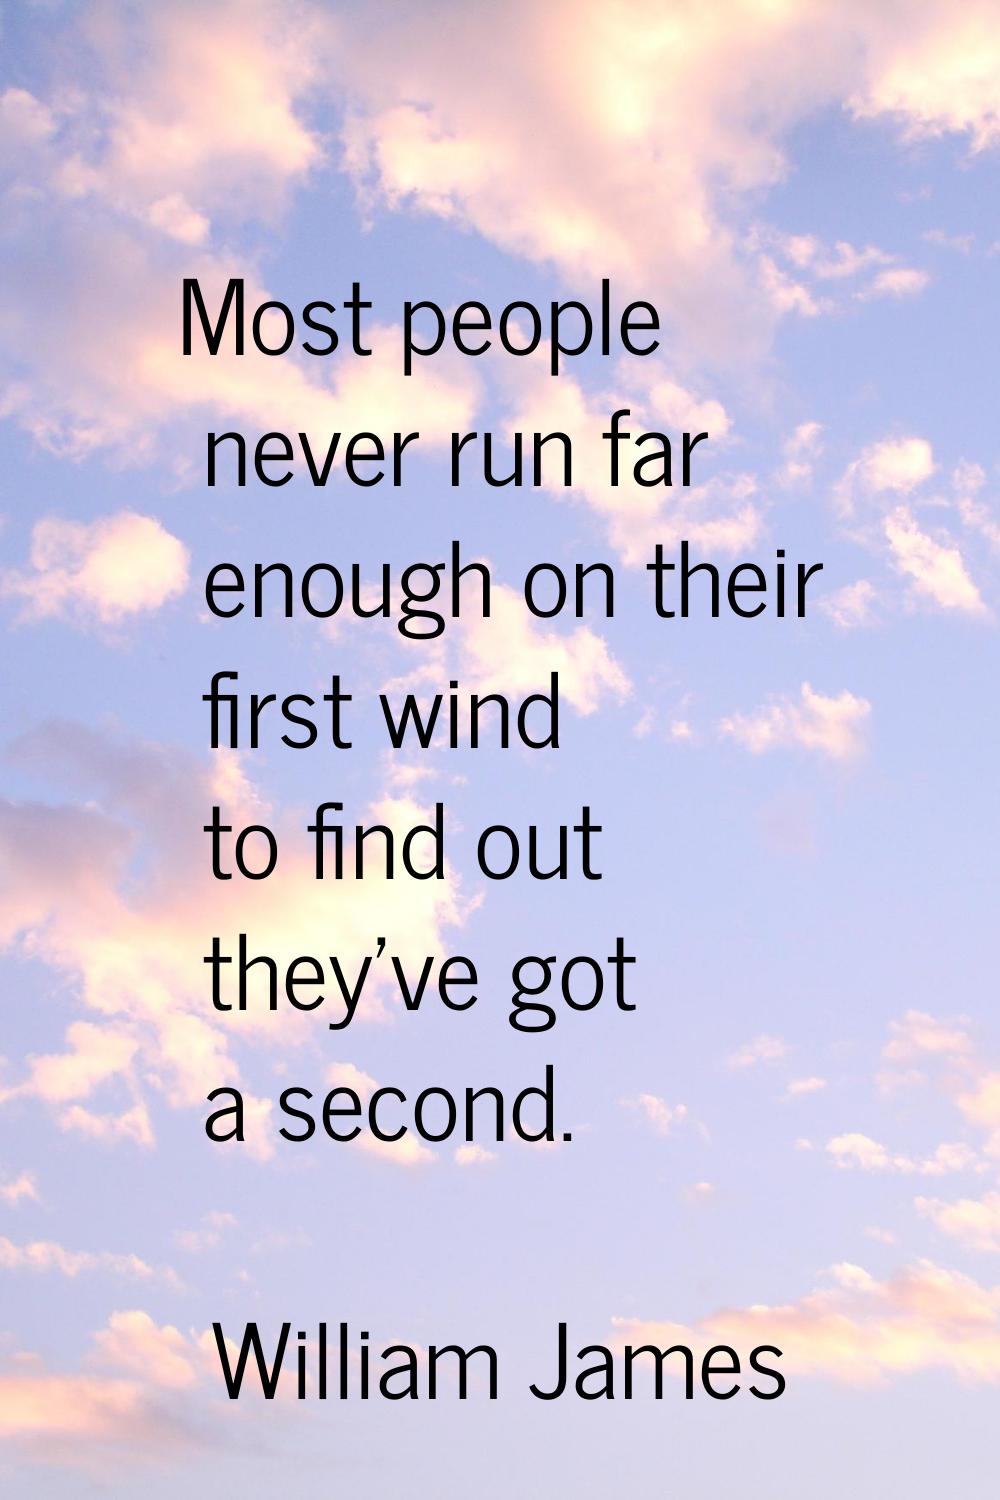 Most people never run far enough on their first wind to find out they've got a second.